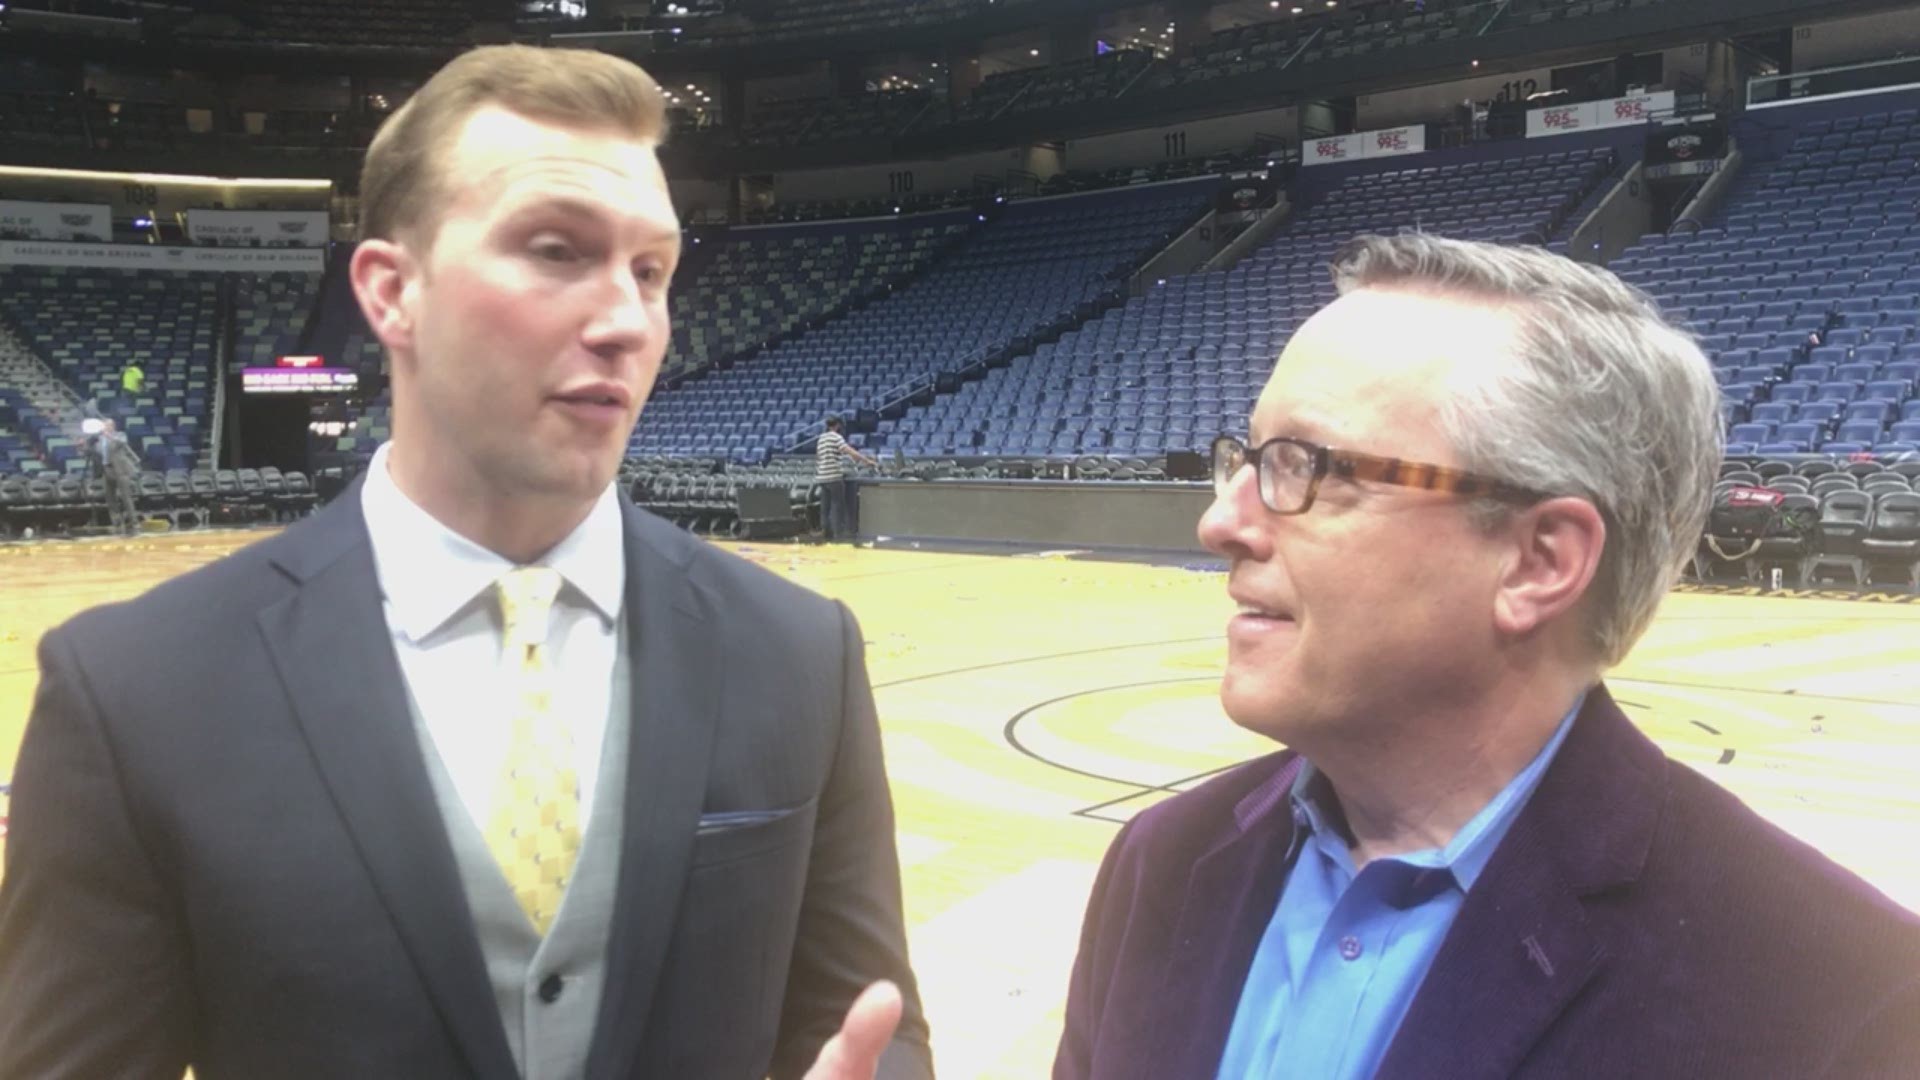 Sports Director Doug Mouton and Sports Reporter Andrew Doak talk about the surprising series.